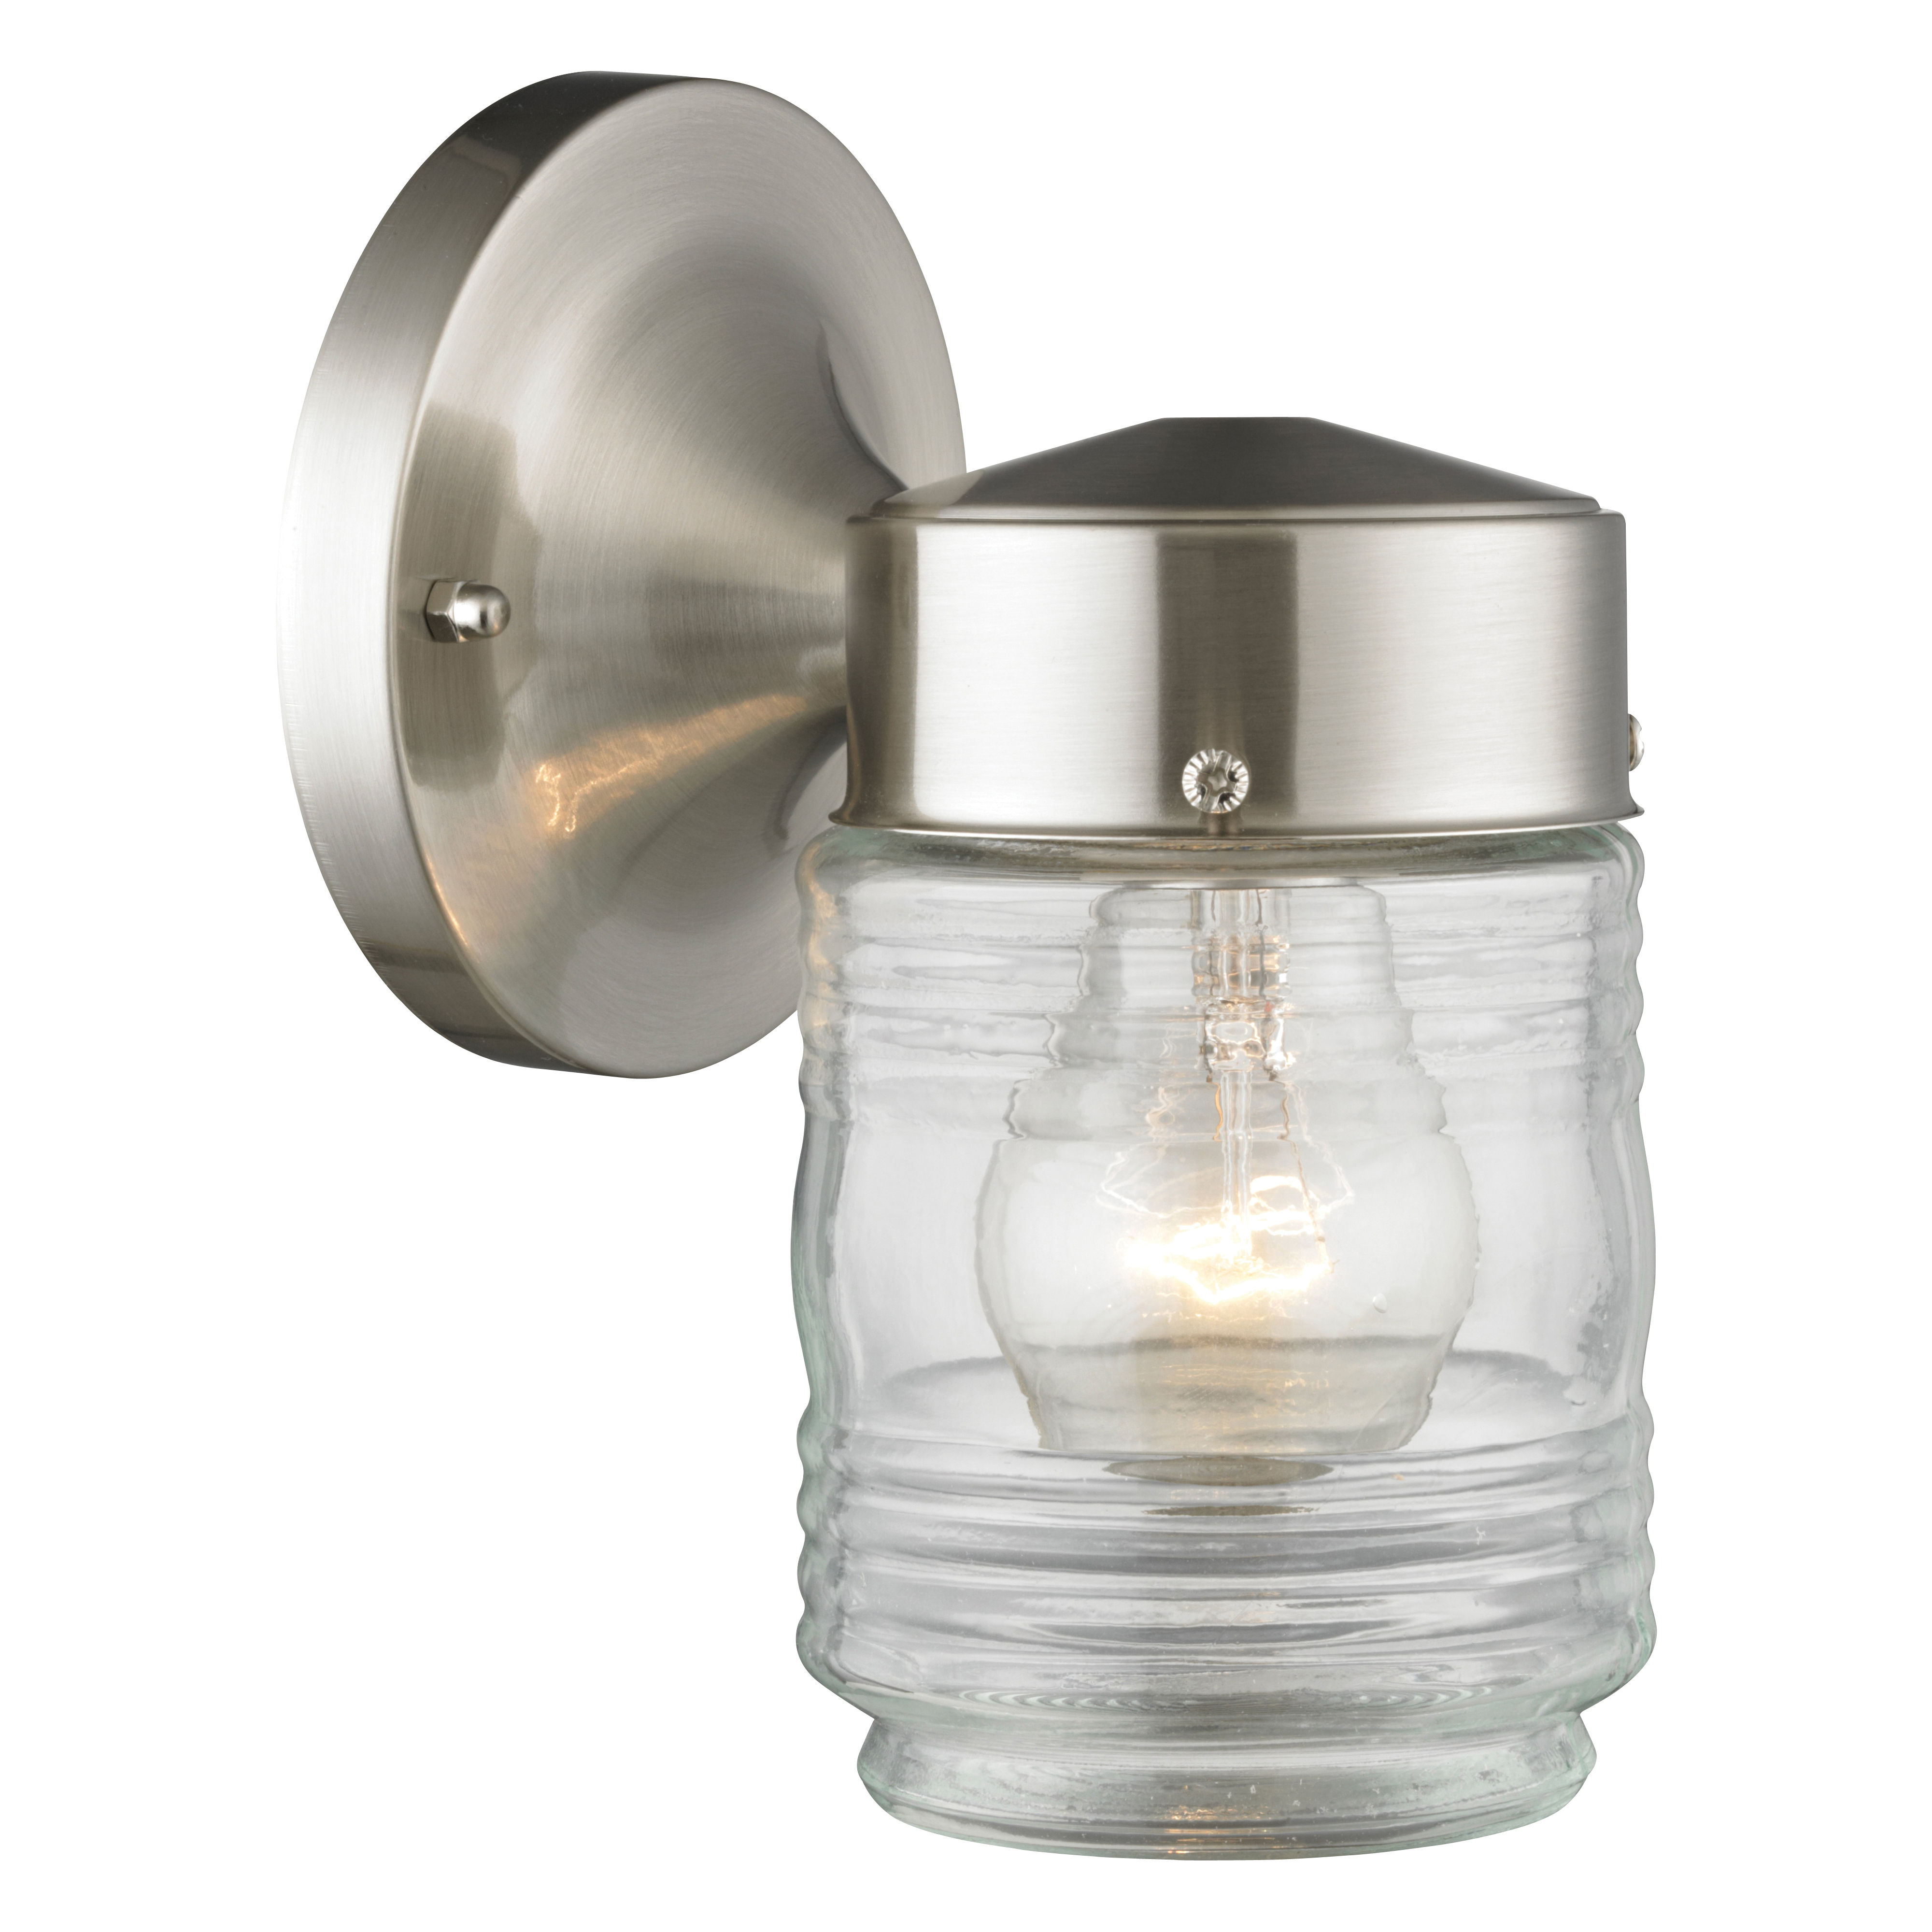 Boston Harbor Outdoor Wall Lantern, 120 V, 60 W, A19 or CFL Lamp, Steel Fixture, Brushed Nickel